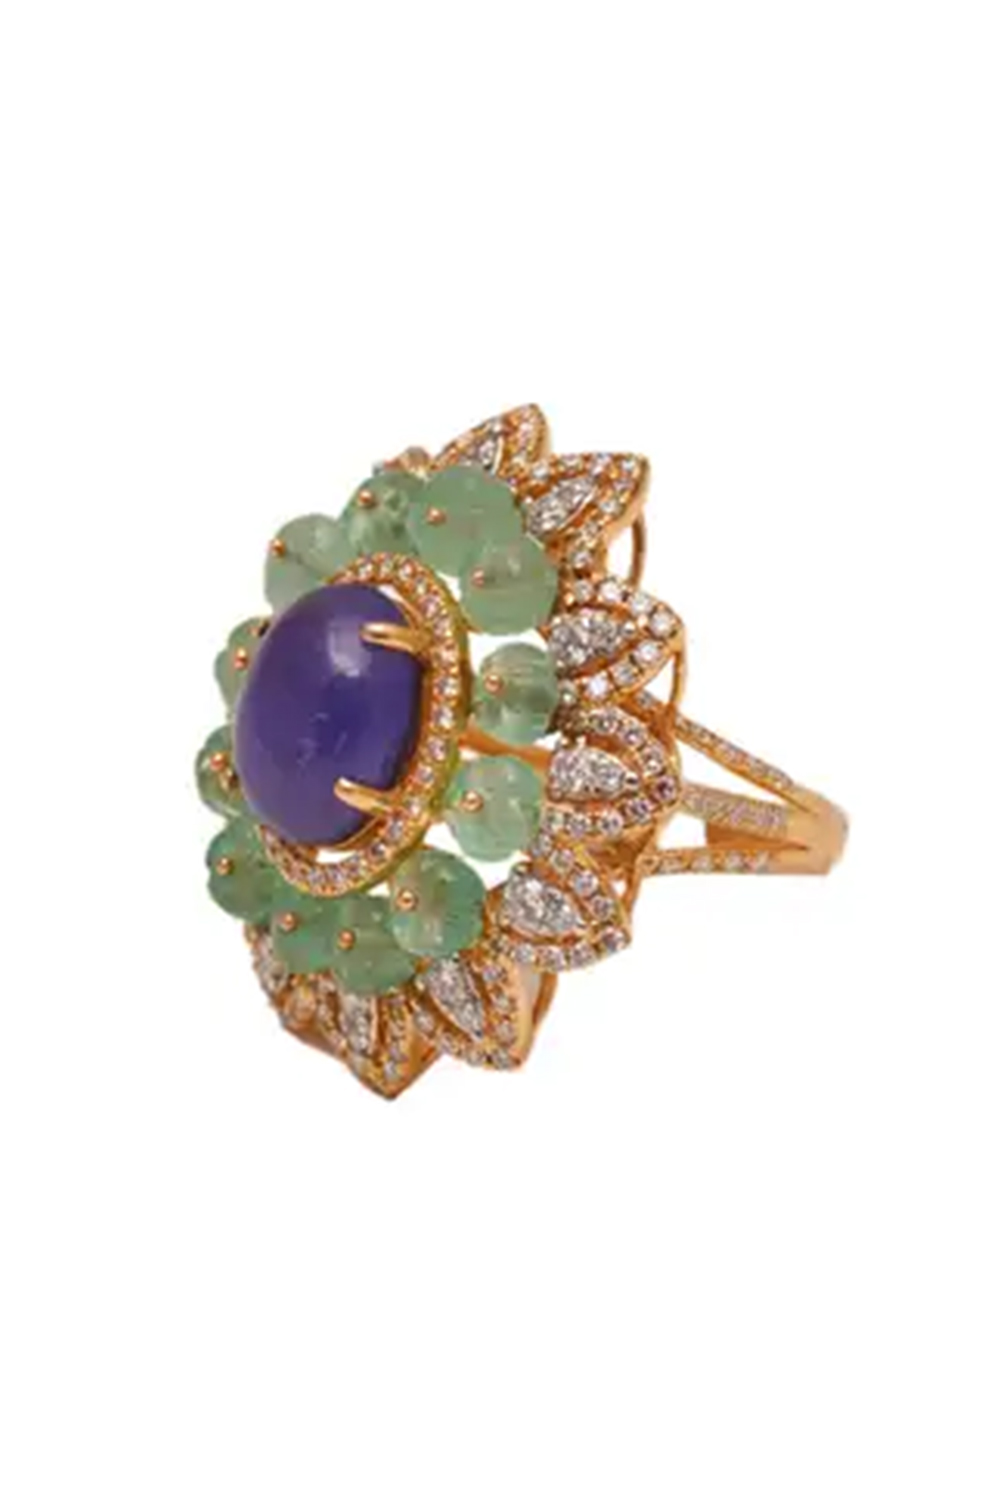 18k gold 6.11cts Emerald & 4.35 cts Tz & 4.35cts Diamond Ring